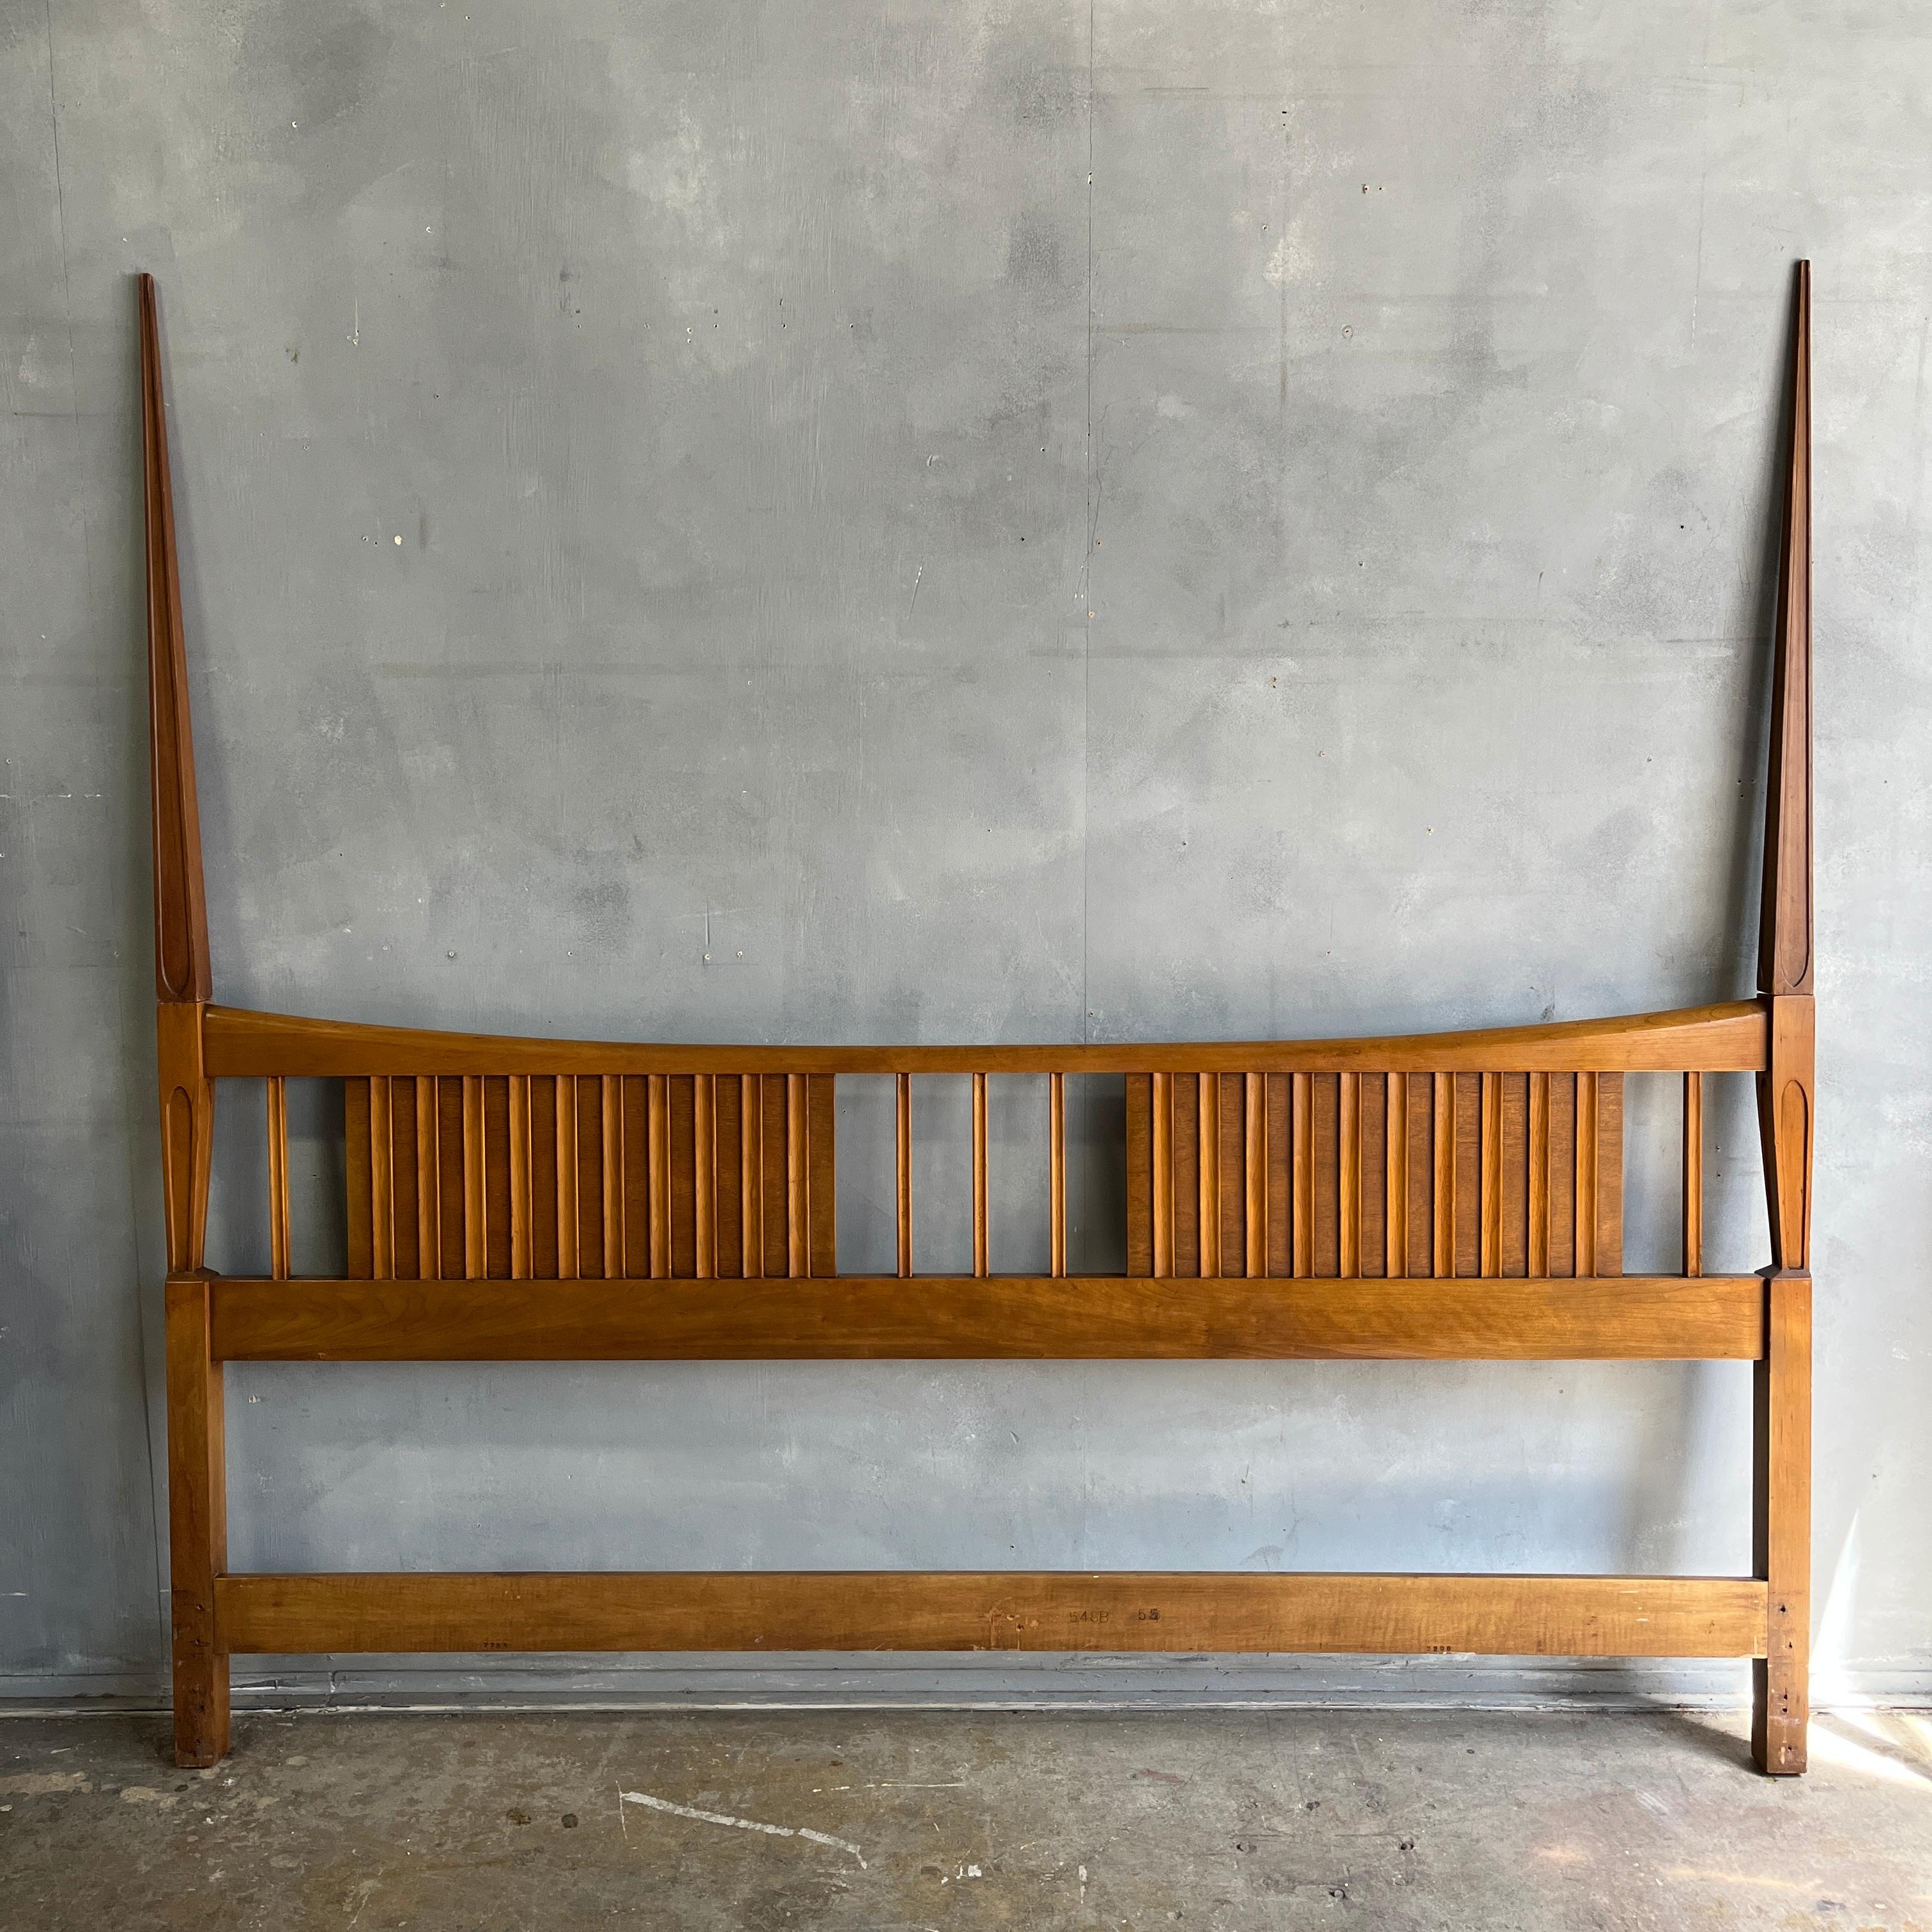 John Widdicomb sculptural tall post king size bed headboard with tapered double spires, circa 1950. Frames show typical age-appropriate signs of use which we have tidied.

Overall dimensions: 79.5